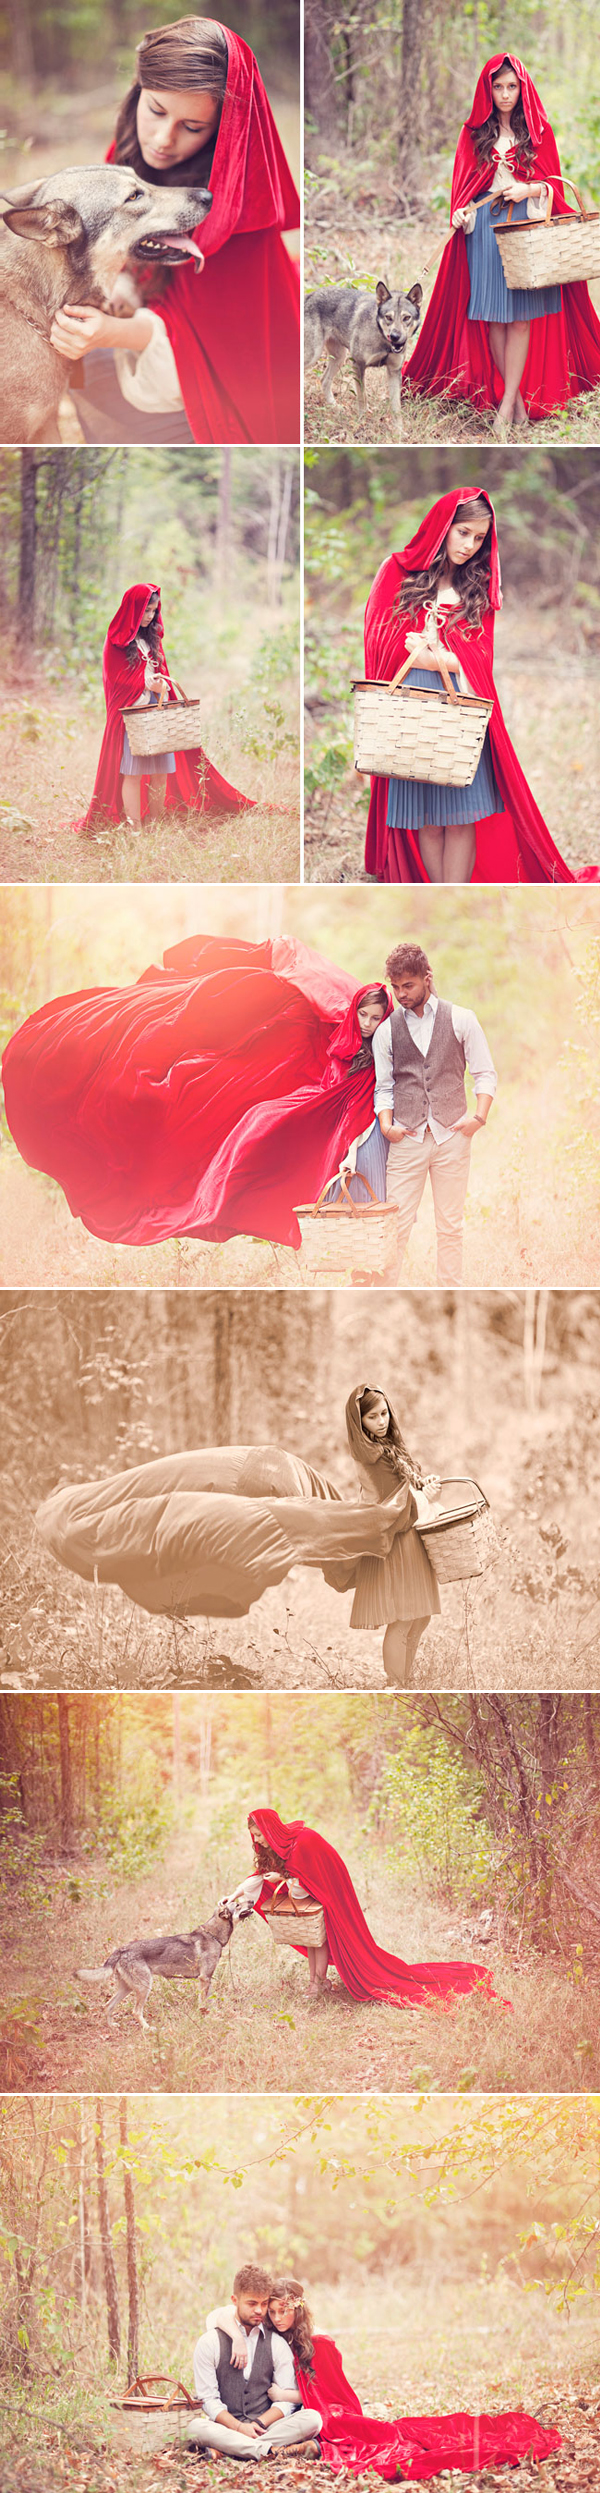 Little Red Riding Hood fairytale engagement photo